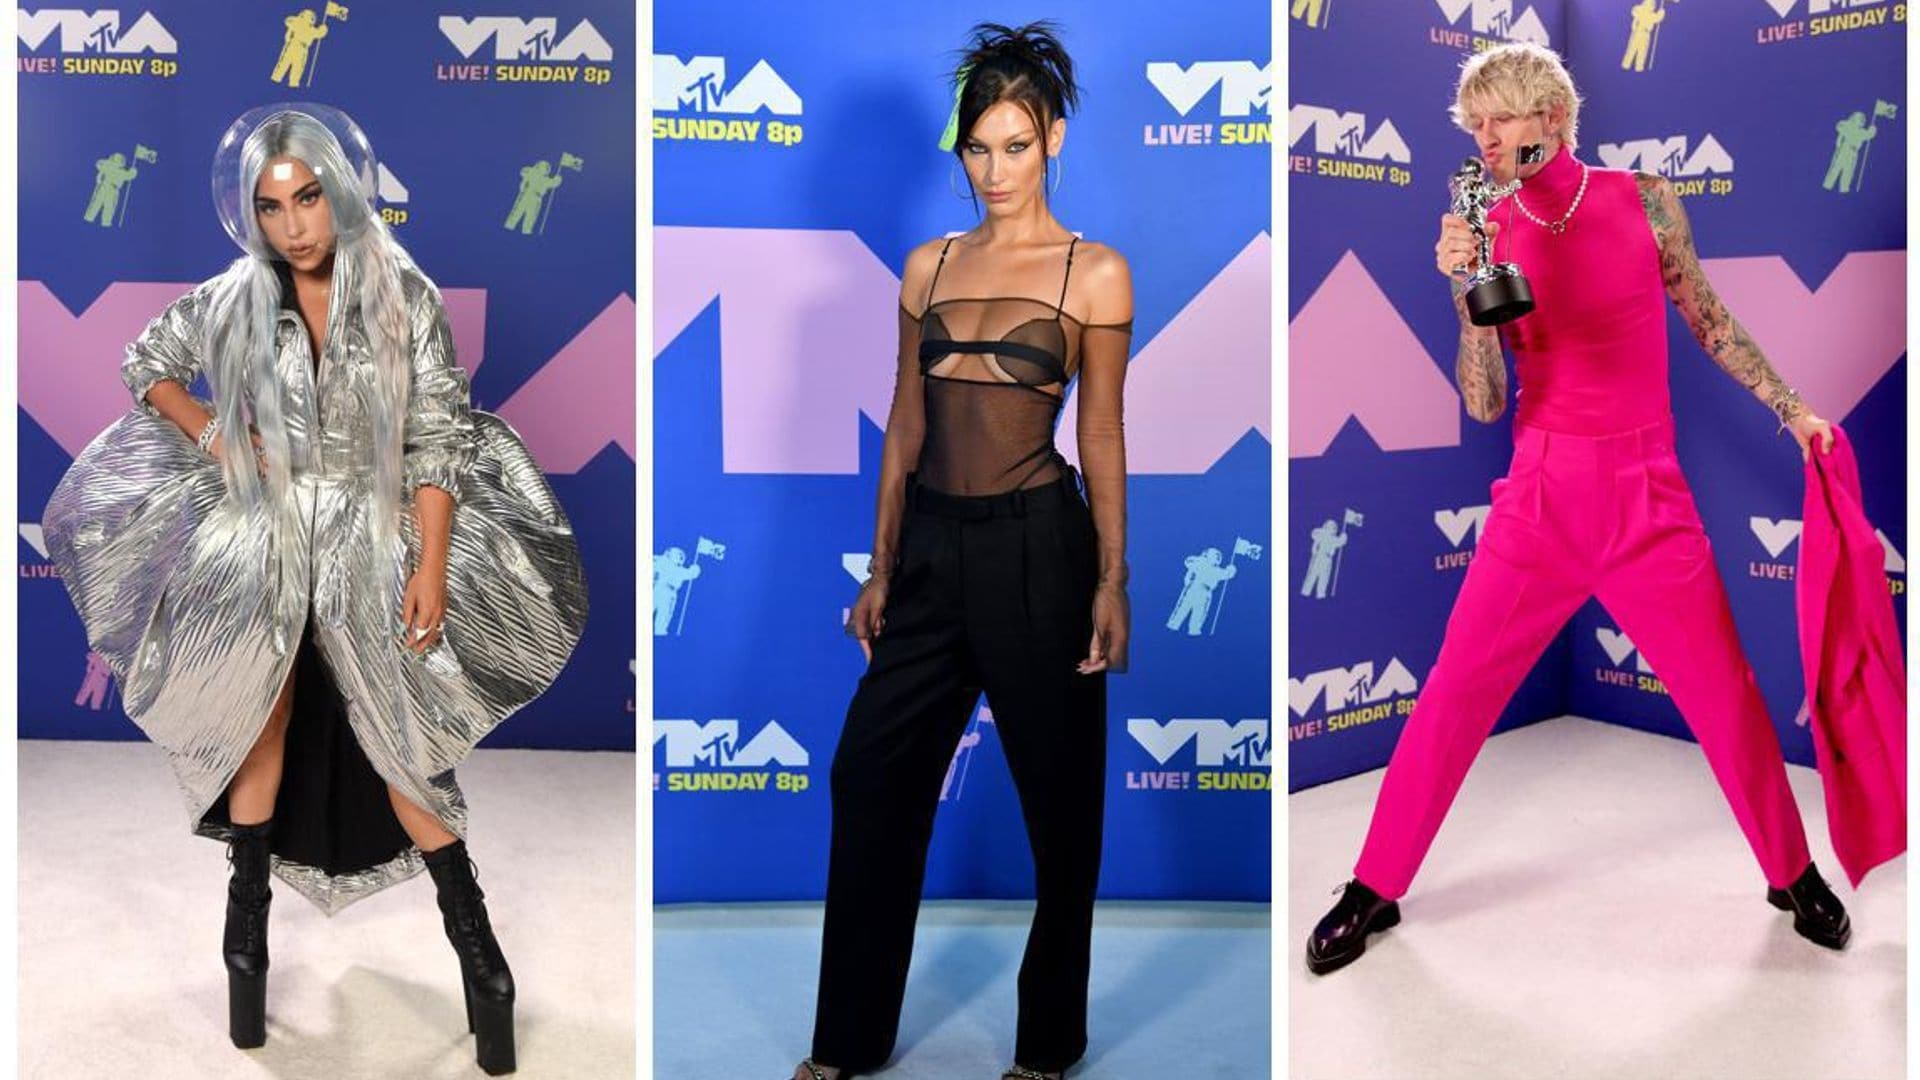 Here are some of the most head-turning fashion looks from the 2020 MTV VMAs